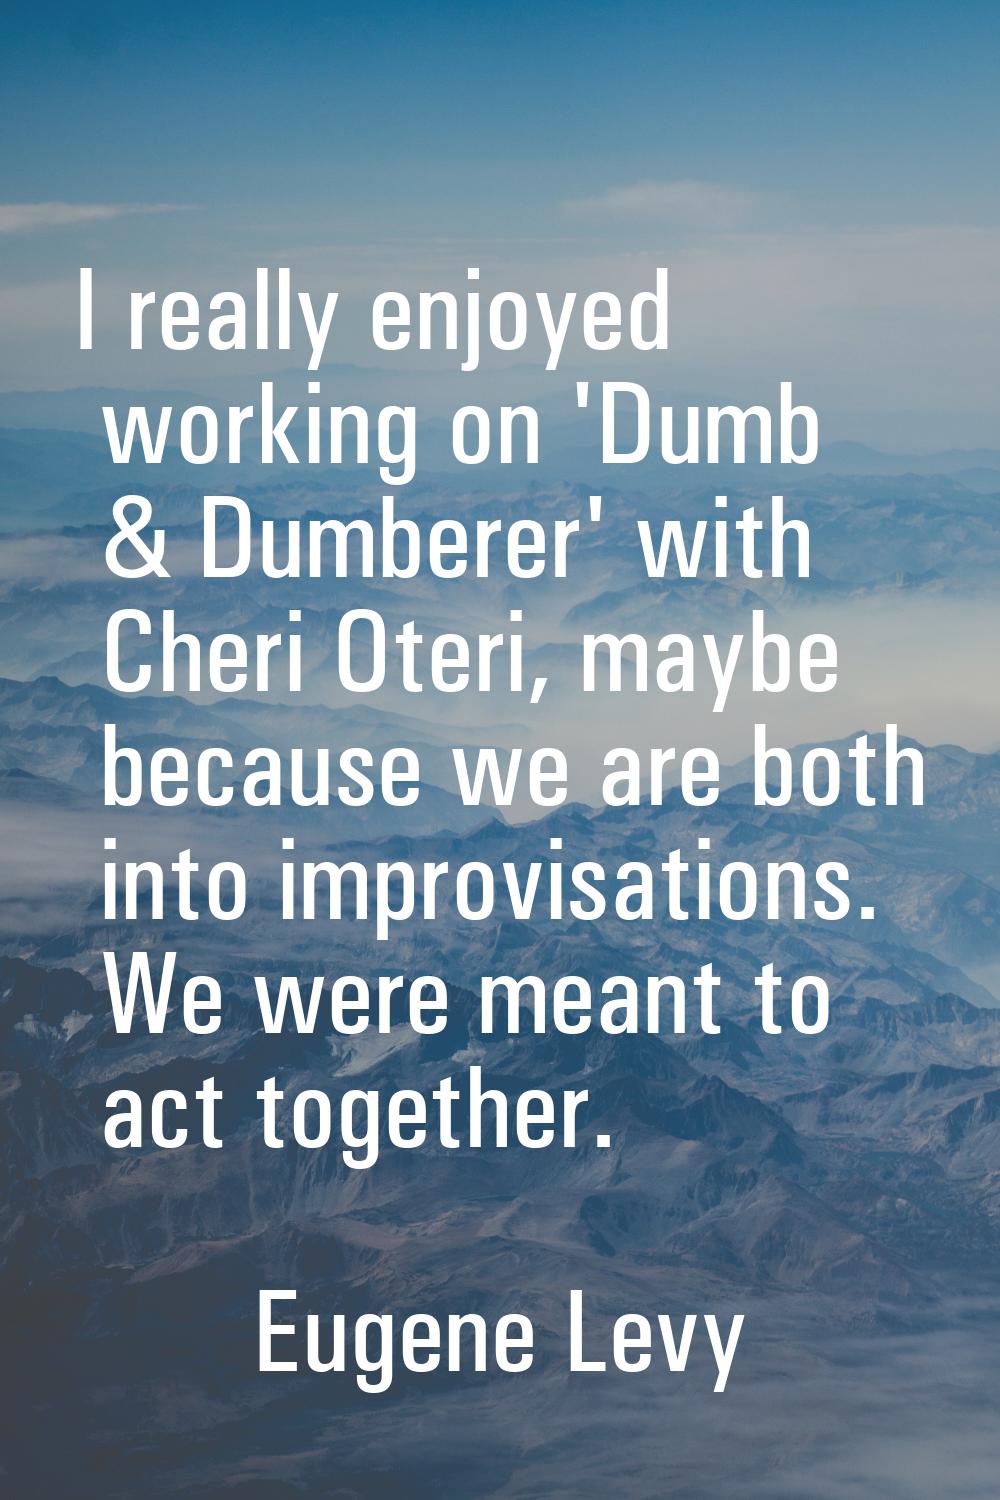 I really enjoyed working on 'Dumb & Dumberer' with Cheri Oteri, maybe because we are both into impr